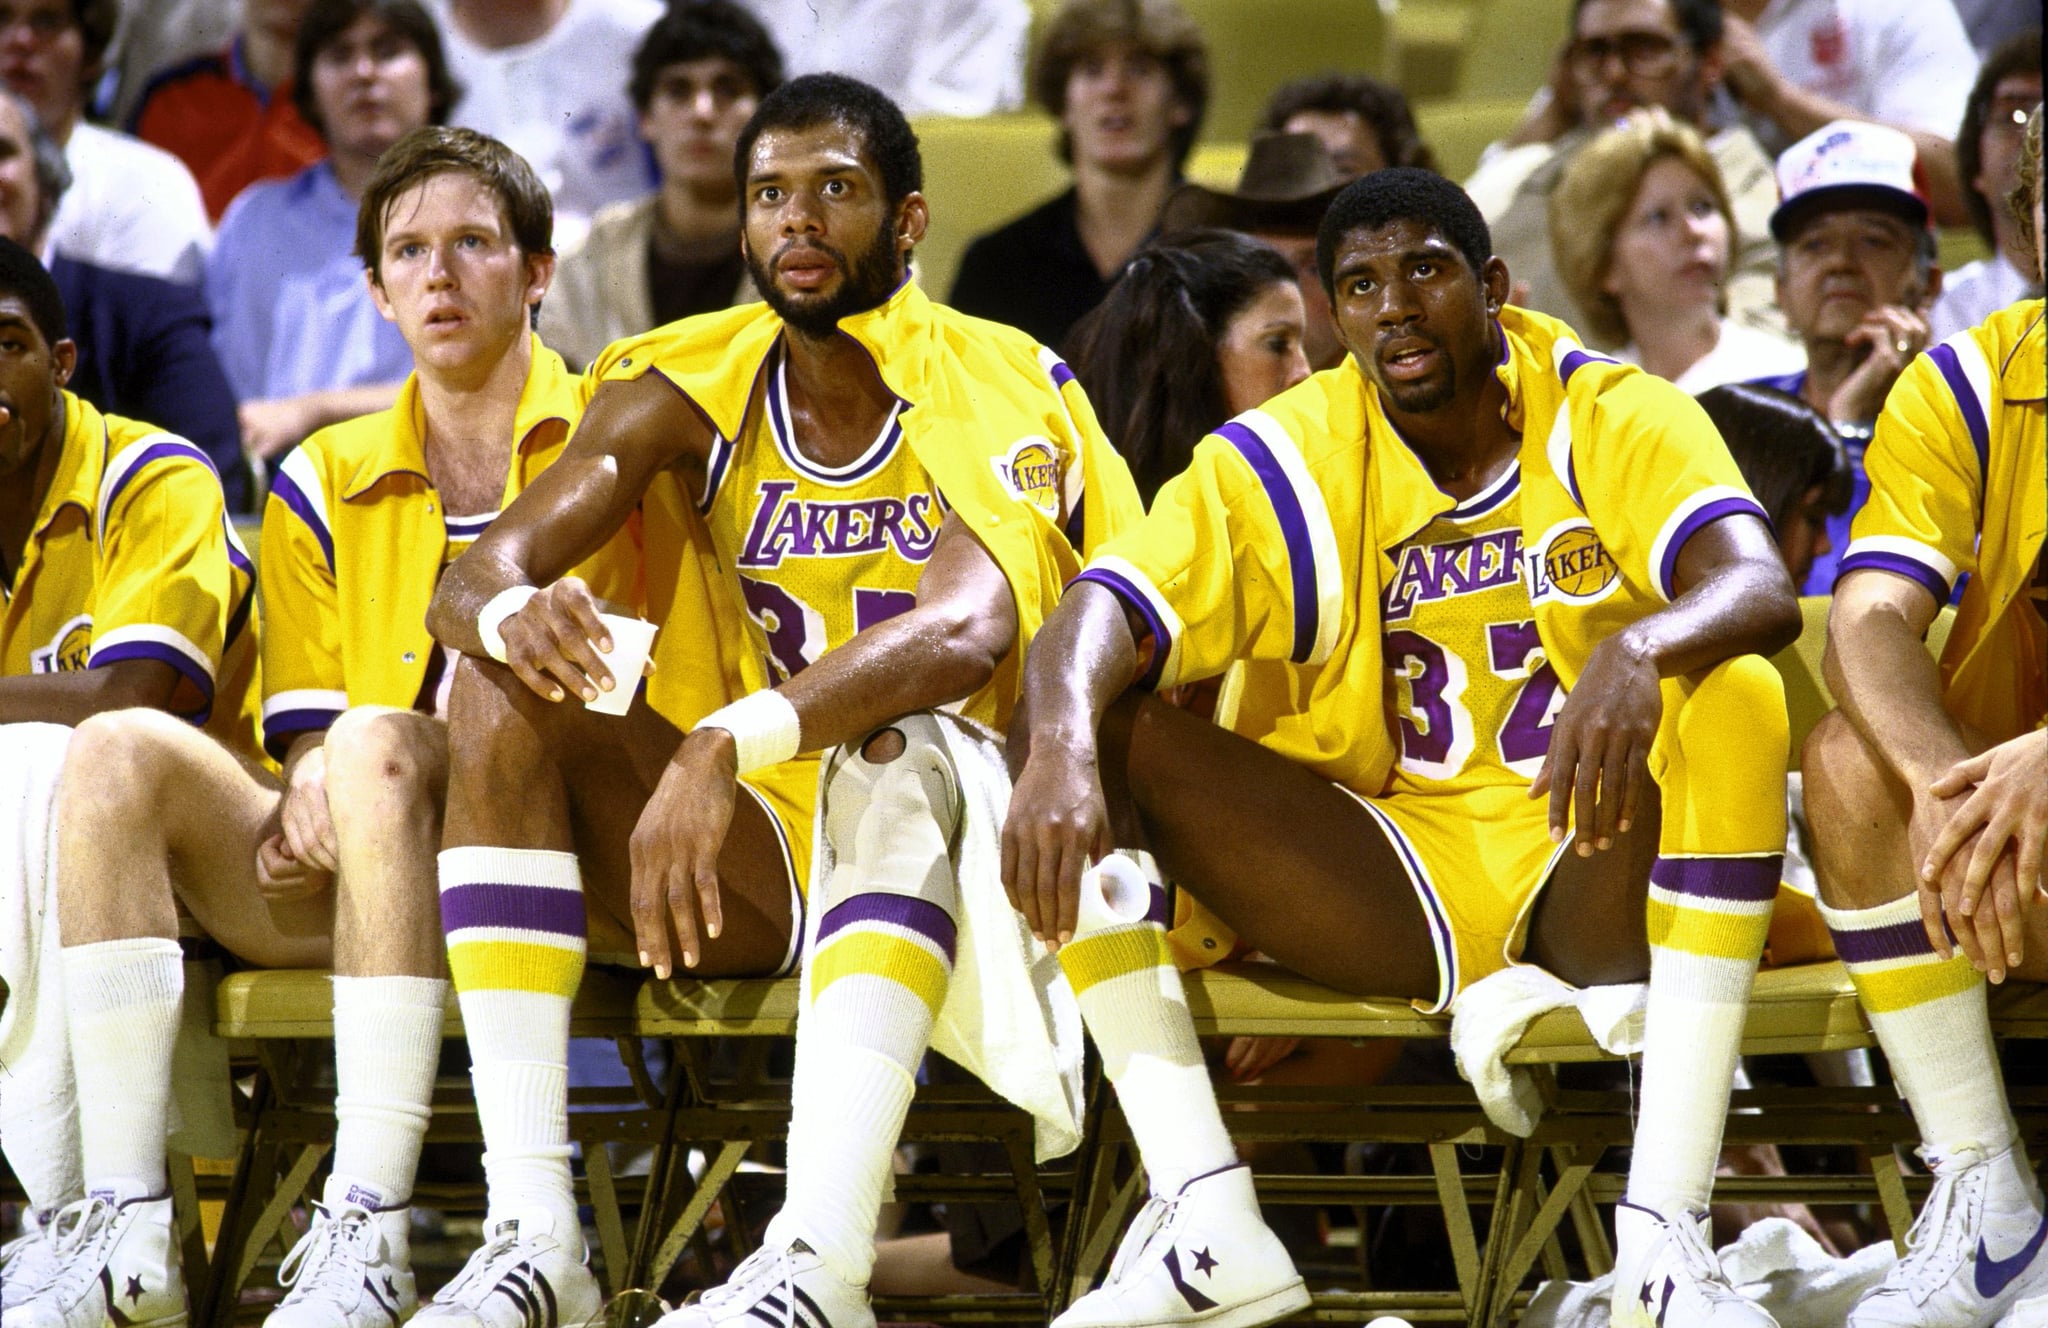  Los Angeles Lakers Kareem Abdul-Jabbar (33) and Magic Johnson (32) on sideline during game vs San Antonio Spurs. Los Angeles, CA 11/20/1981 CREDIT: Manny Millan (Photo by Manny Millan /Sports Illustrated via Getty Images) (Set Number: X26282 )